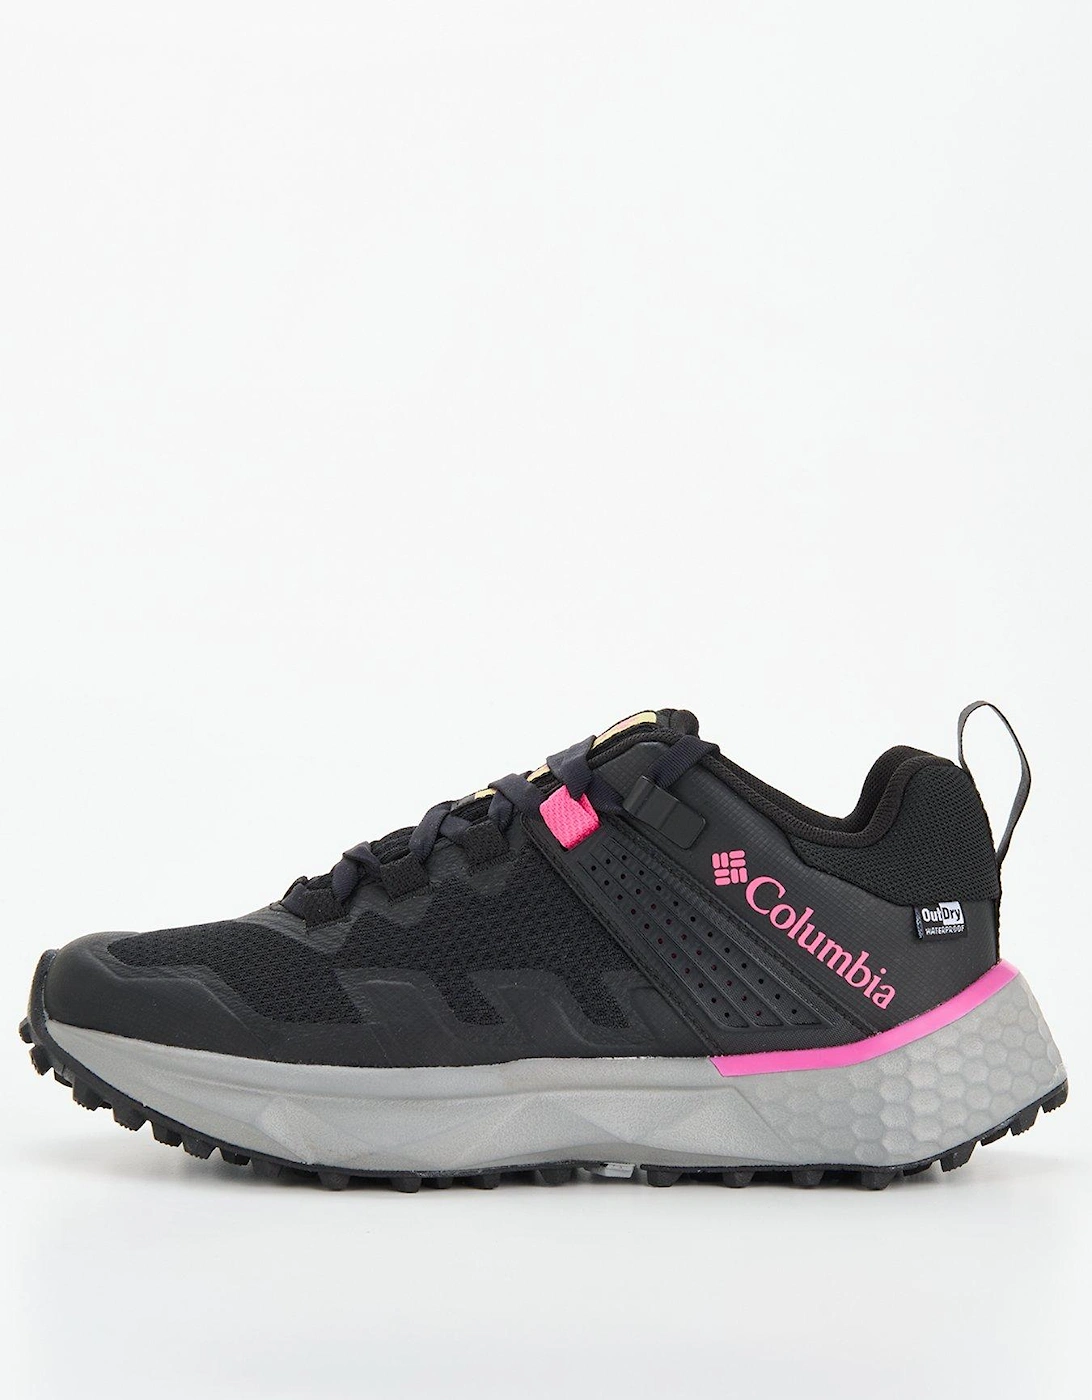 Womens Facet 75 Outdry Waterproof Hiking Shoes - Black/pink, 7 of 6